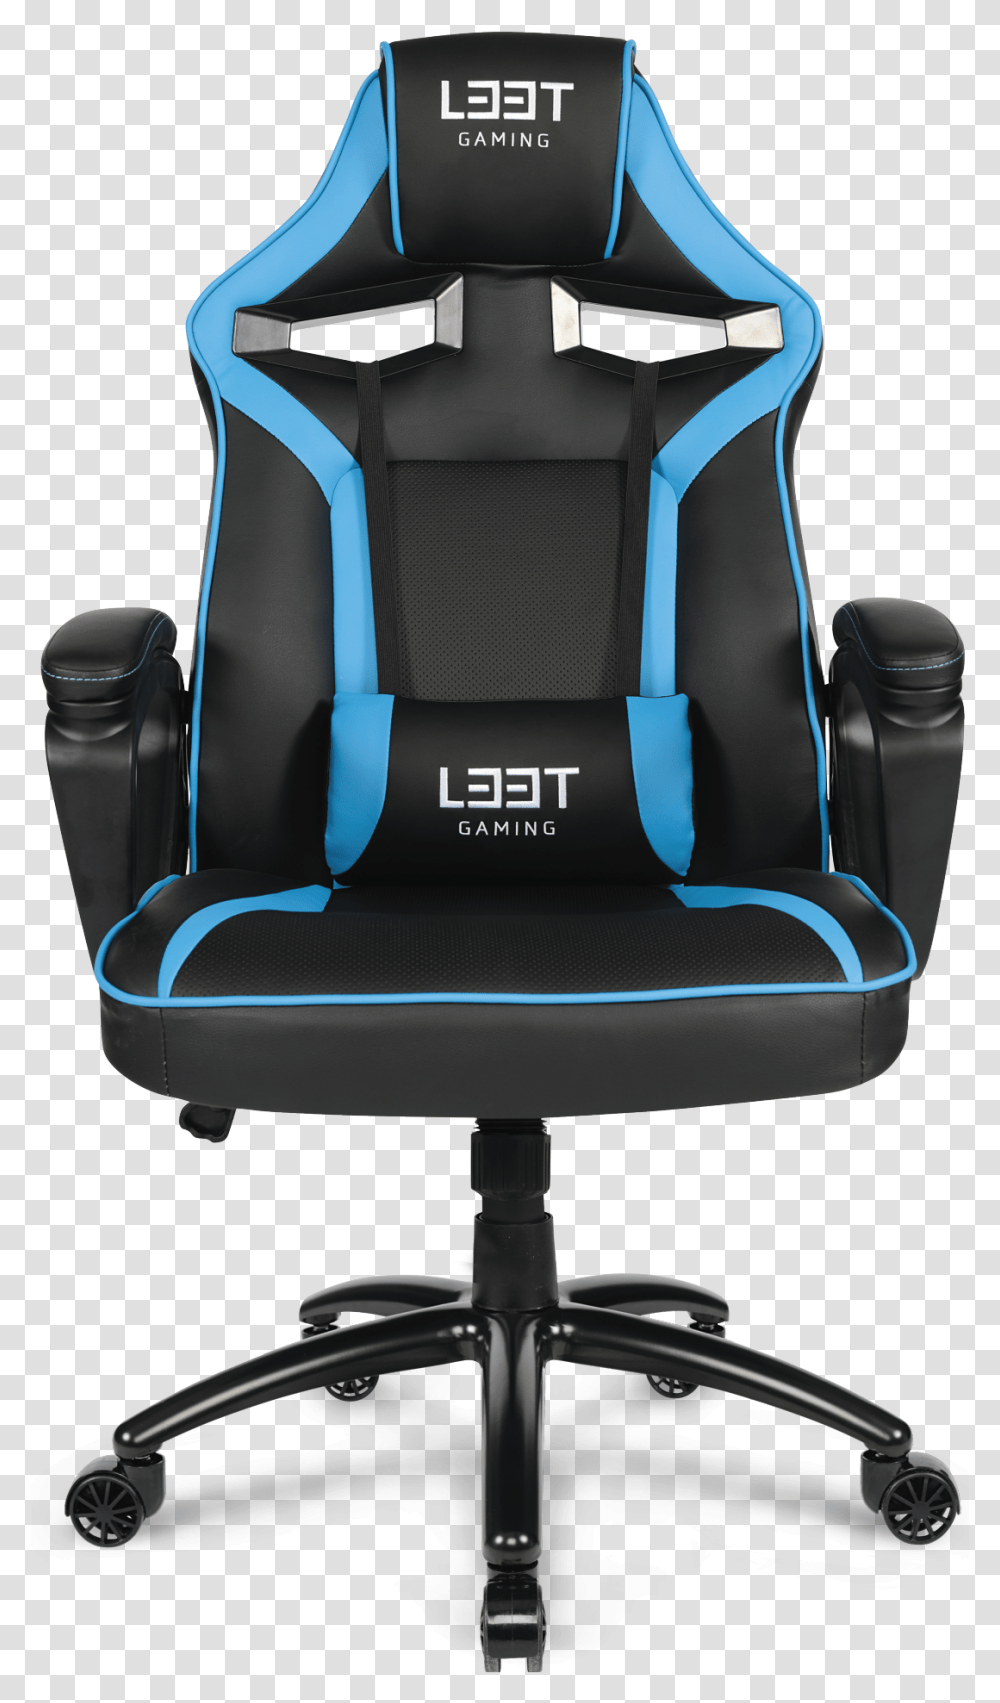 Extreme Blue L33t E Sport Pro Gaming Chair, Cushion, Furniture, Headrest, Car Seat Transparent Png